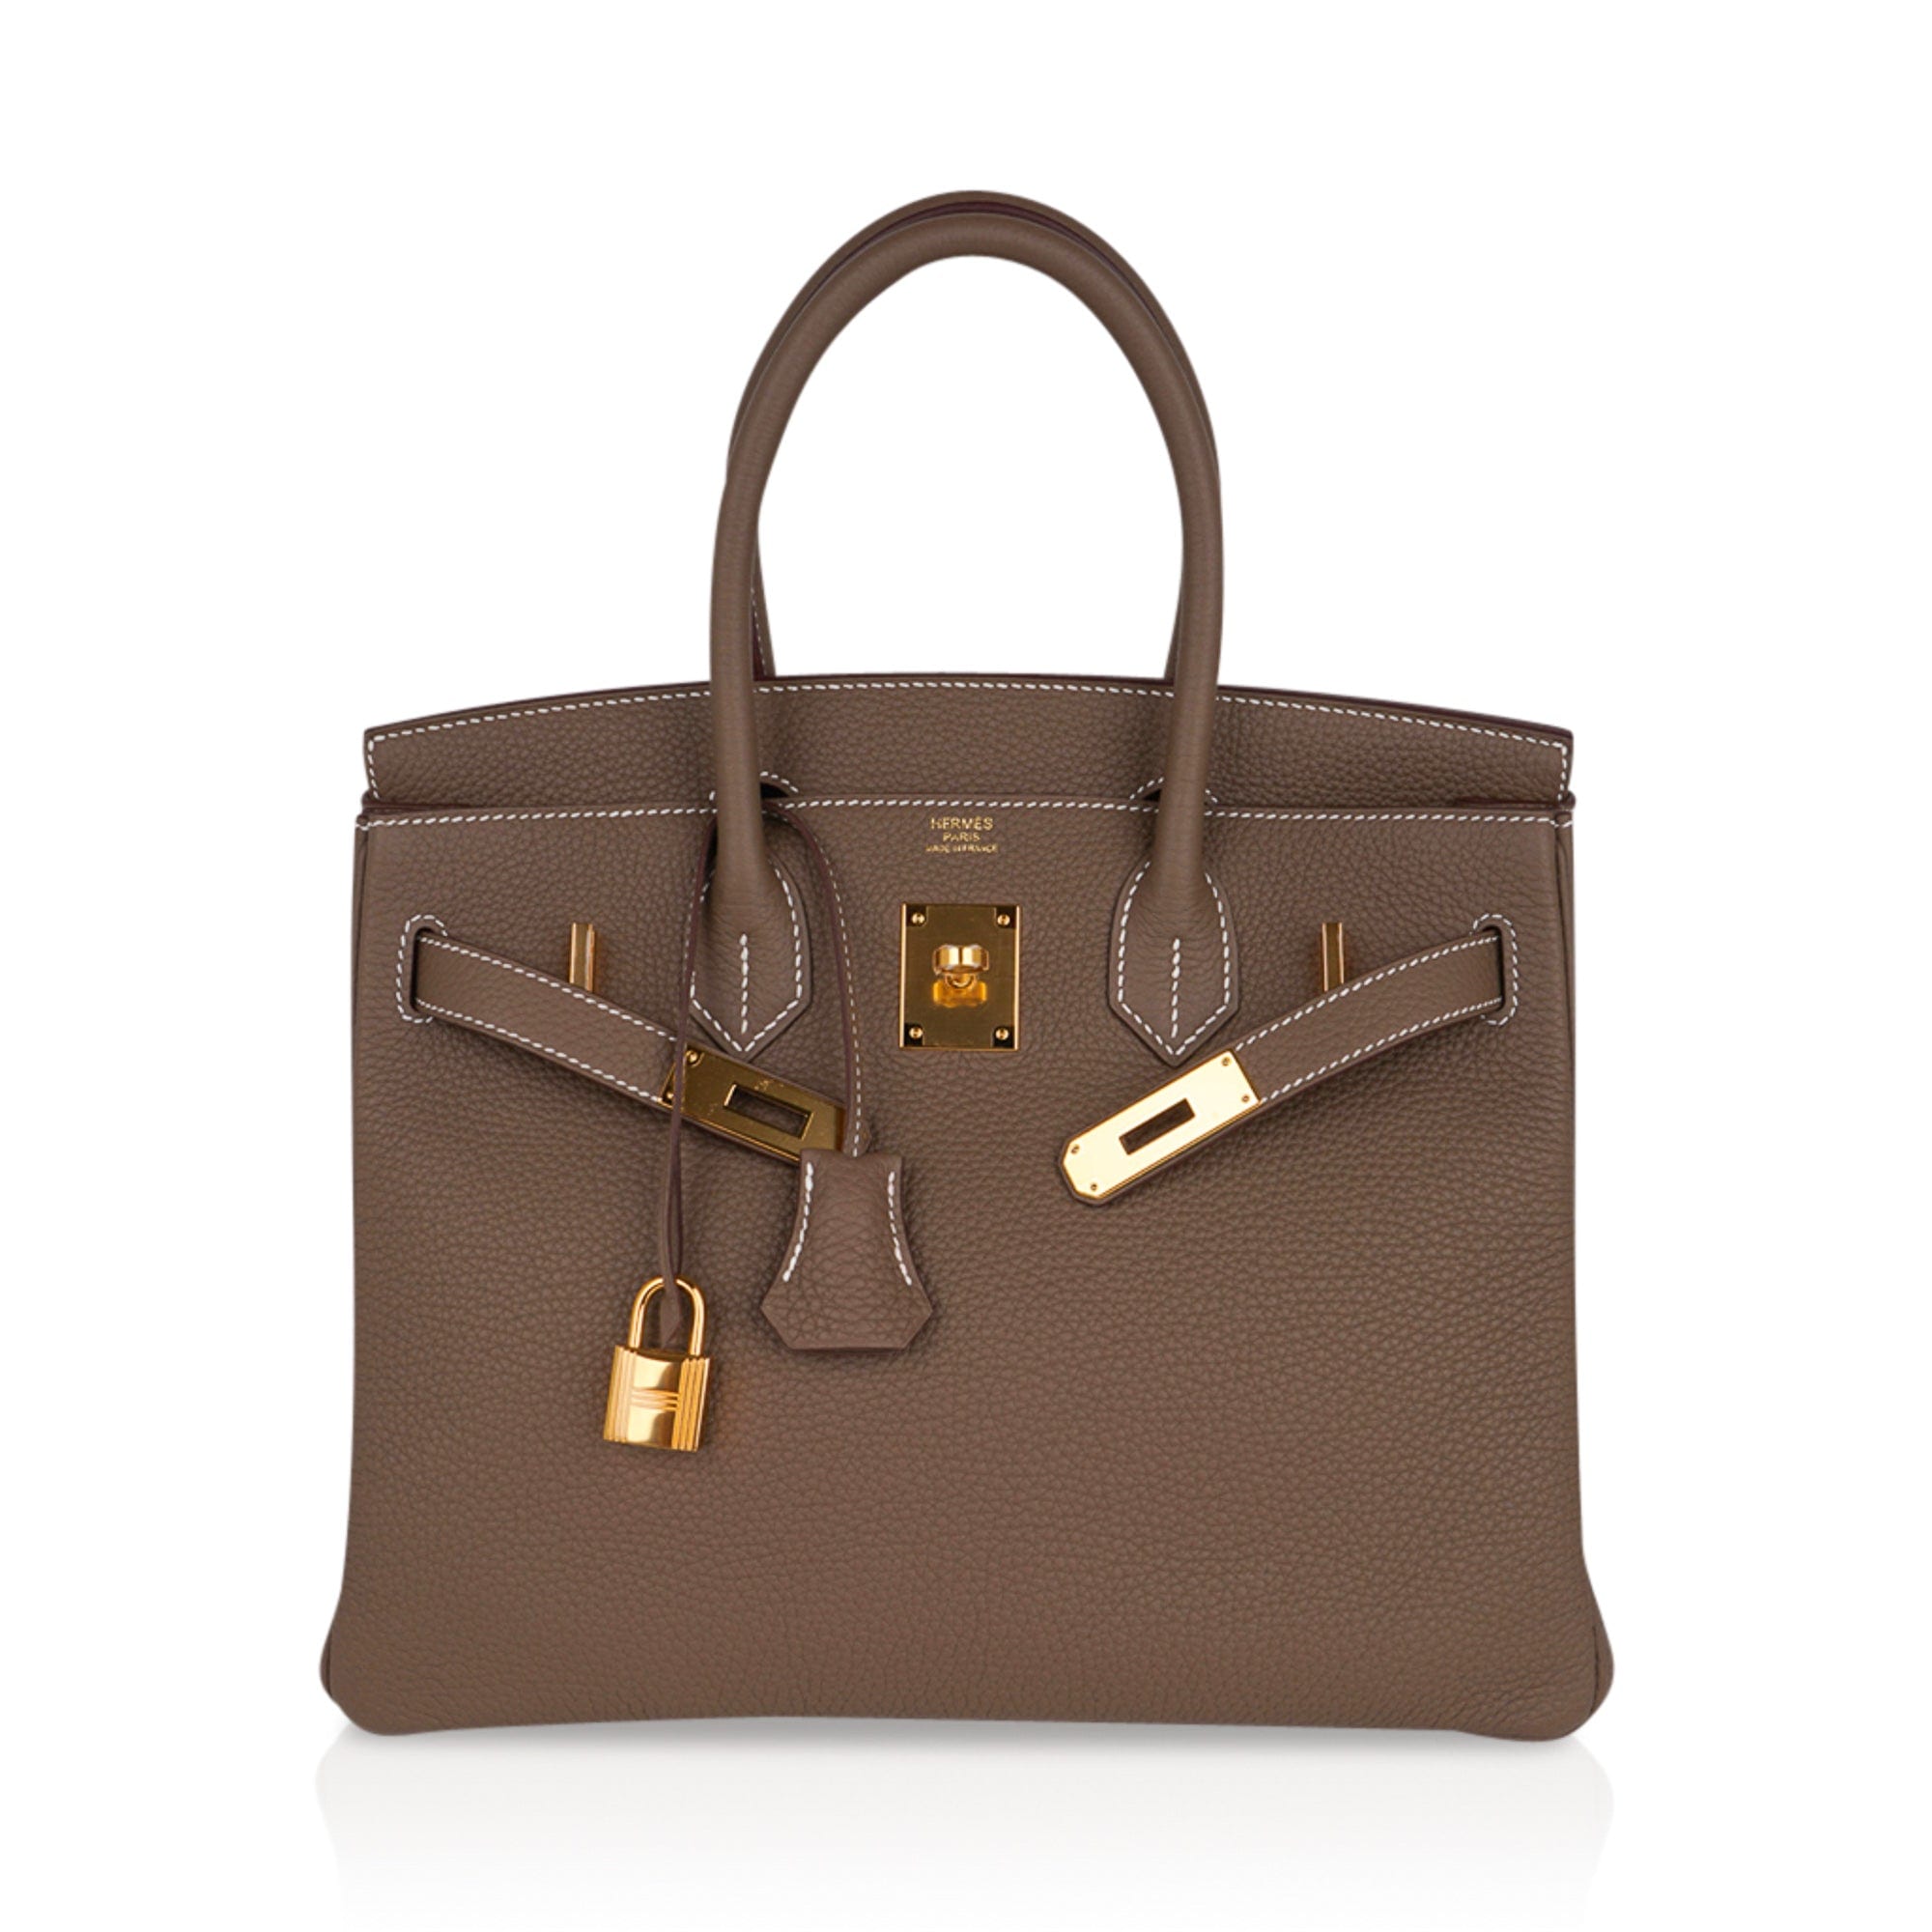 AN ÉTOUPE TOGO LEATHER BIRKIN 30 WITH GOLD HARDWARE